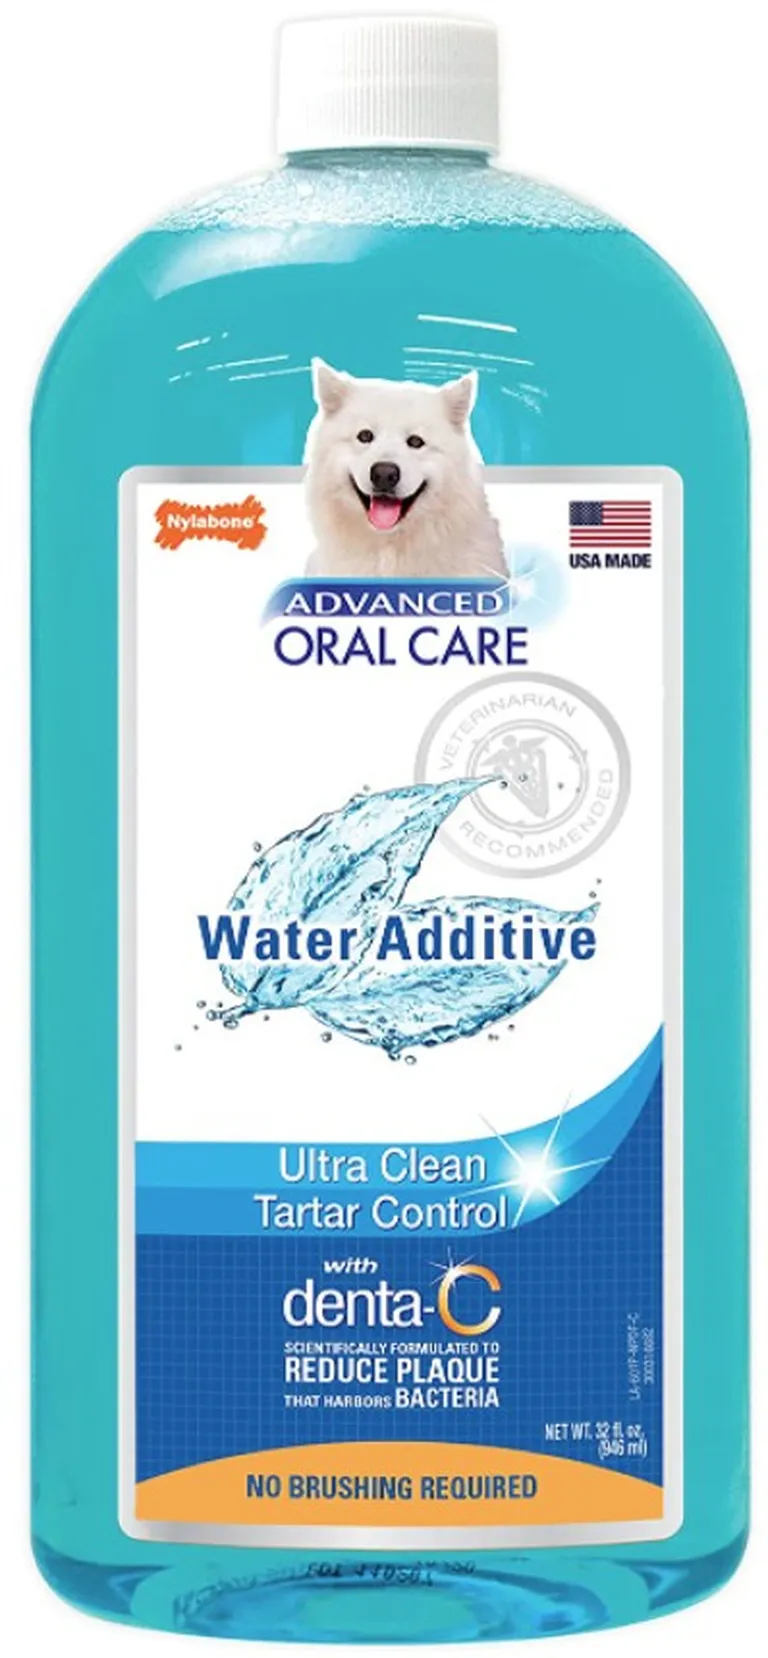 Nylabone Advanced Oral Care Water Additive Ultra Clean Tartar Control for Dogs Photo 1